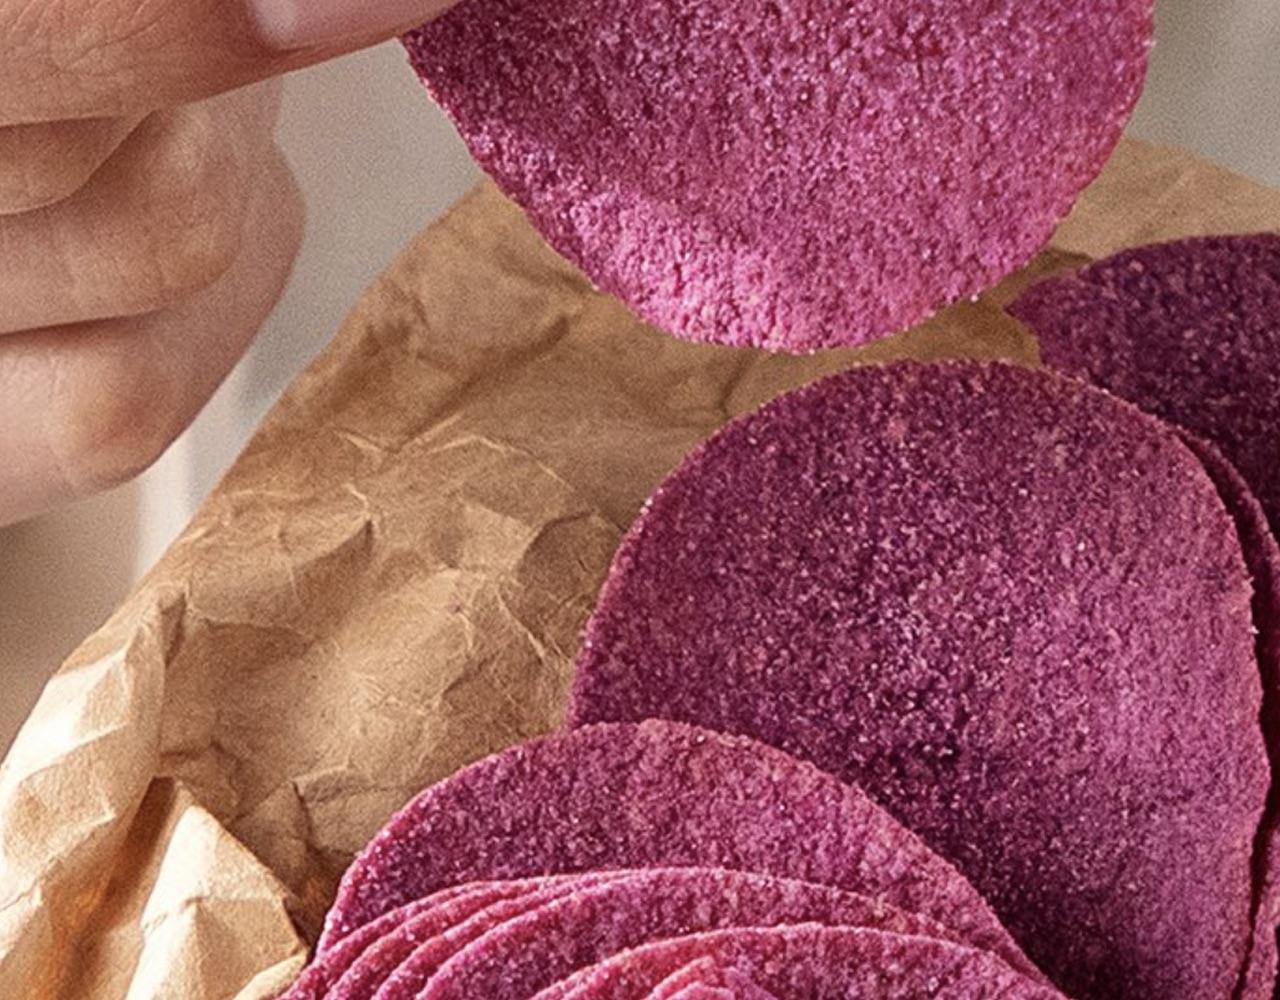 close up image of purple sweet potato chips from korean brand no brand